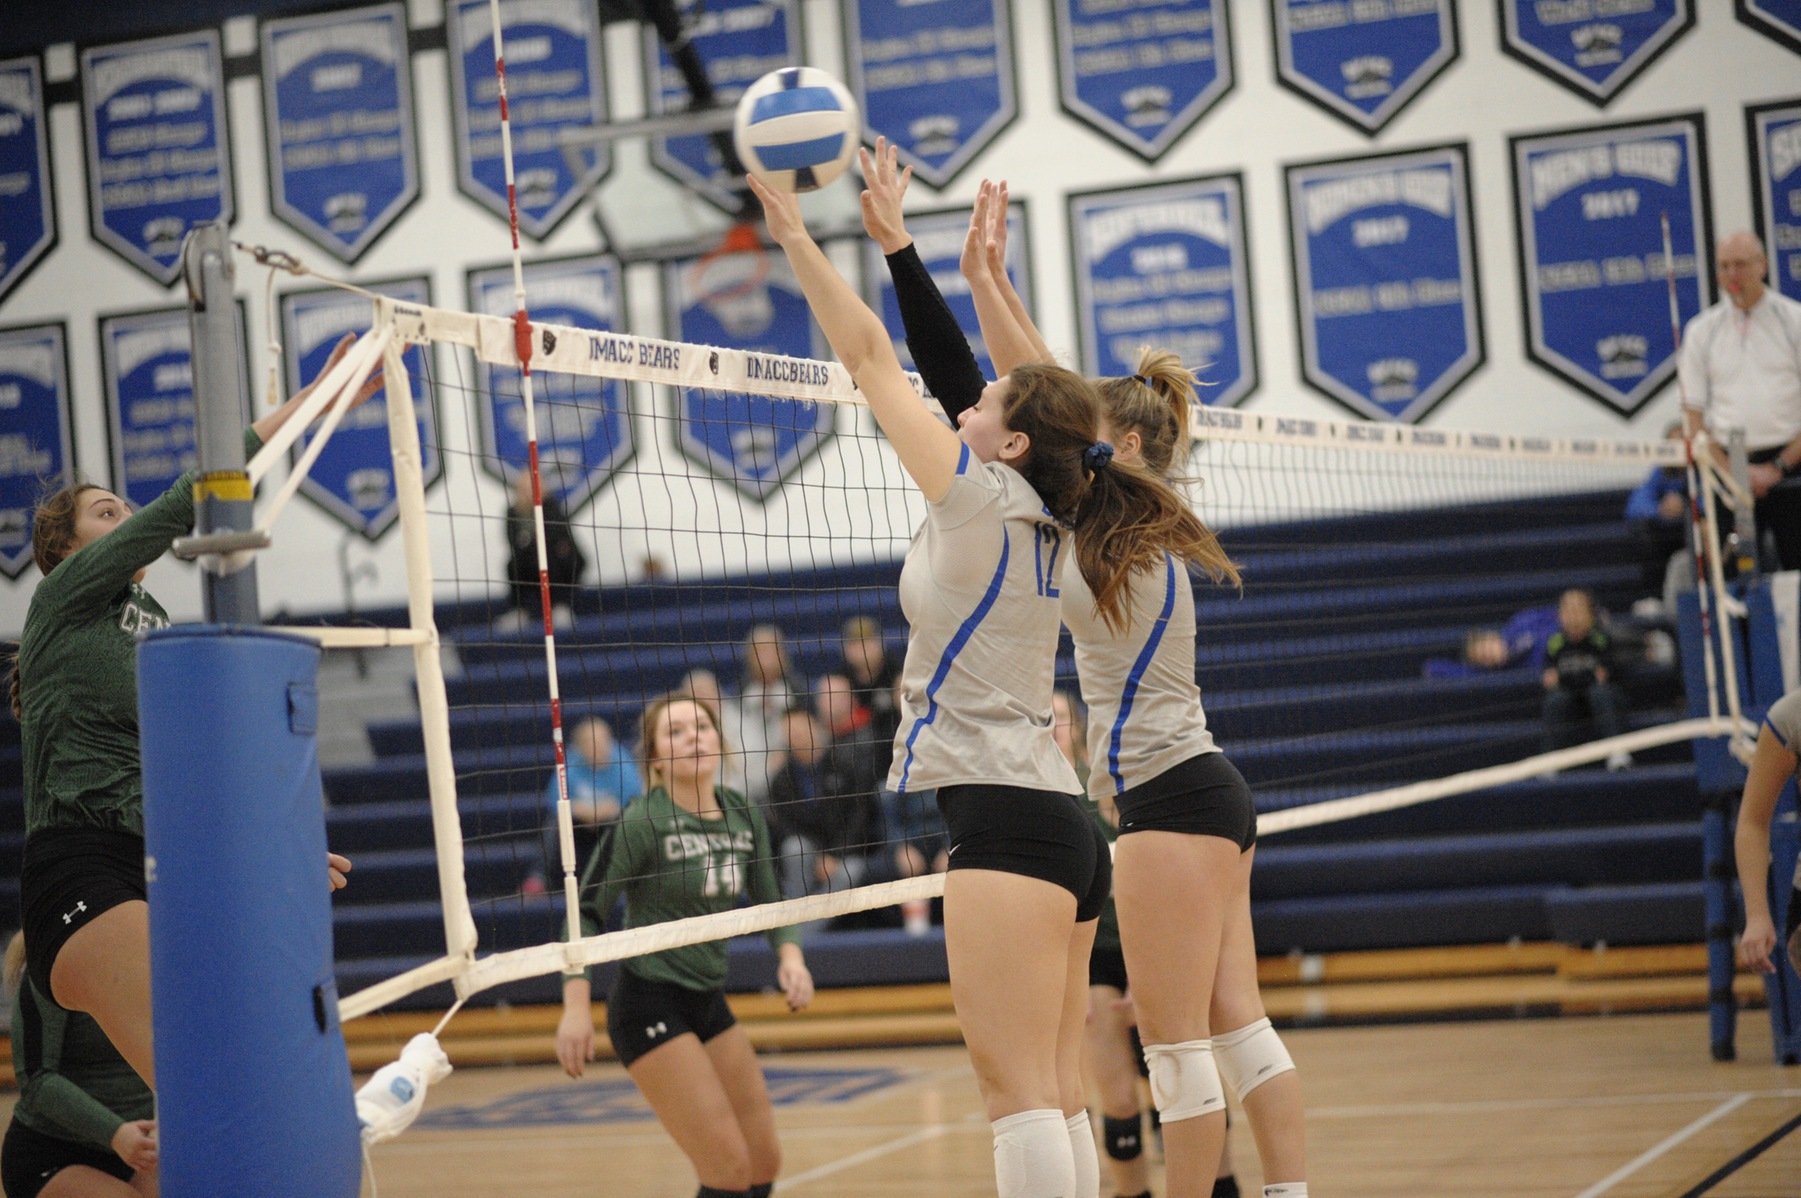 DMACC volleyball team drops 3-1 decision to Central